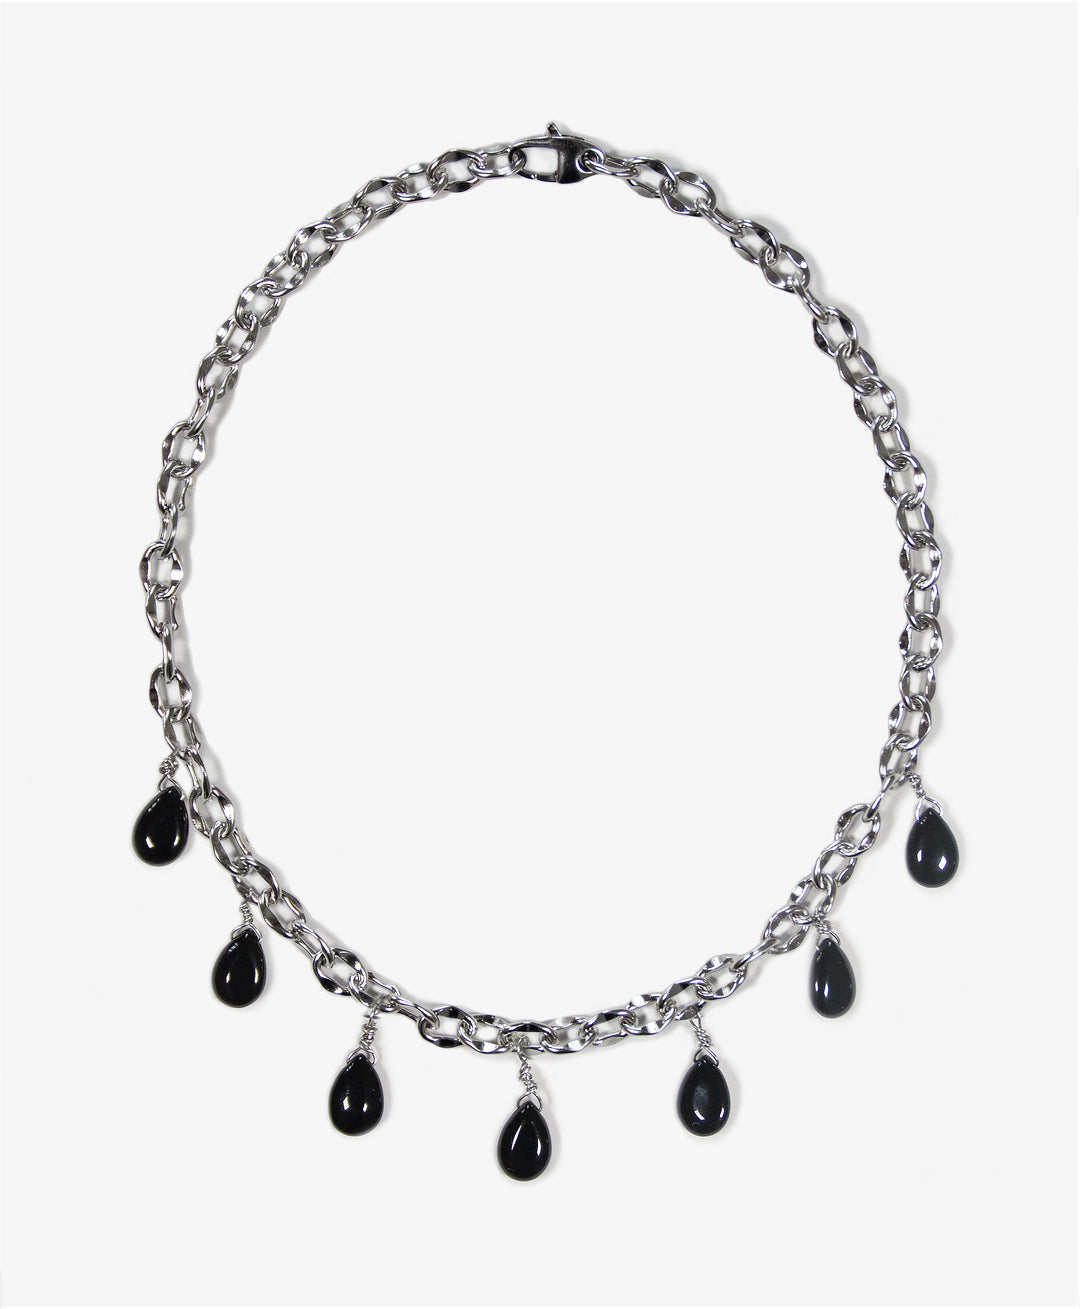 llayers-mens-women-jewelry-silver-stainlesssteel-choker-chain-necklace-unchained-009-agate-Brooklyn-New-York-F1